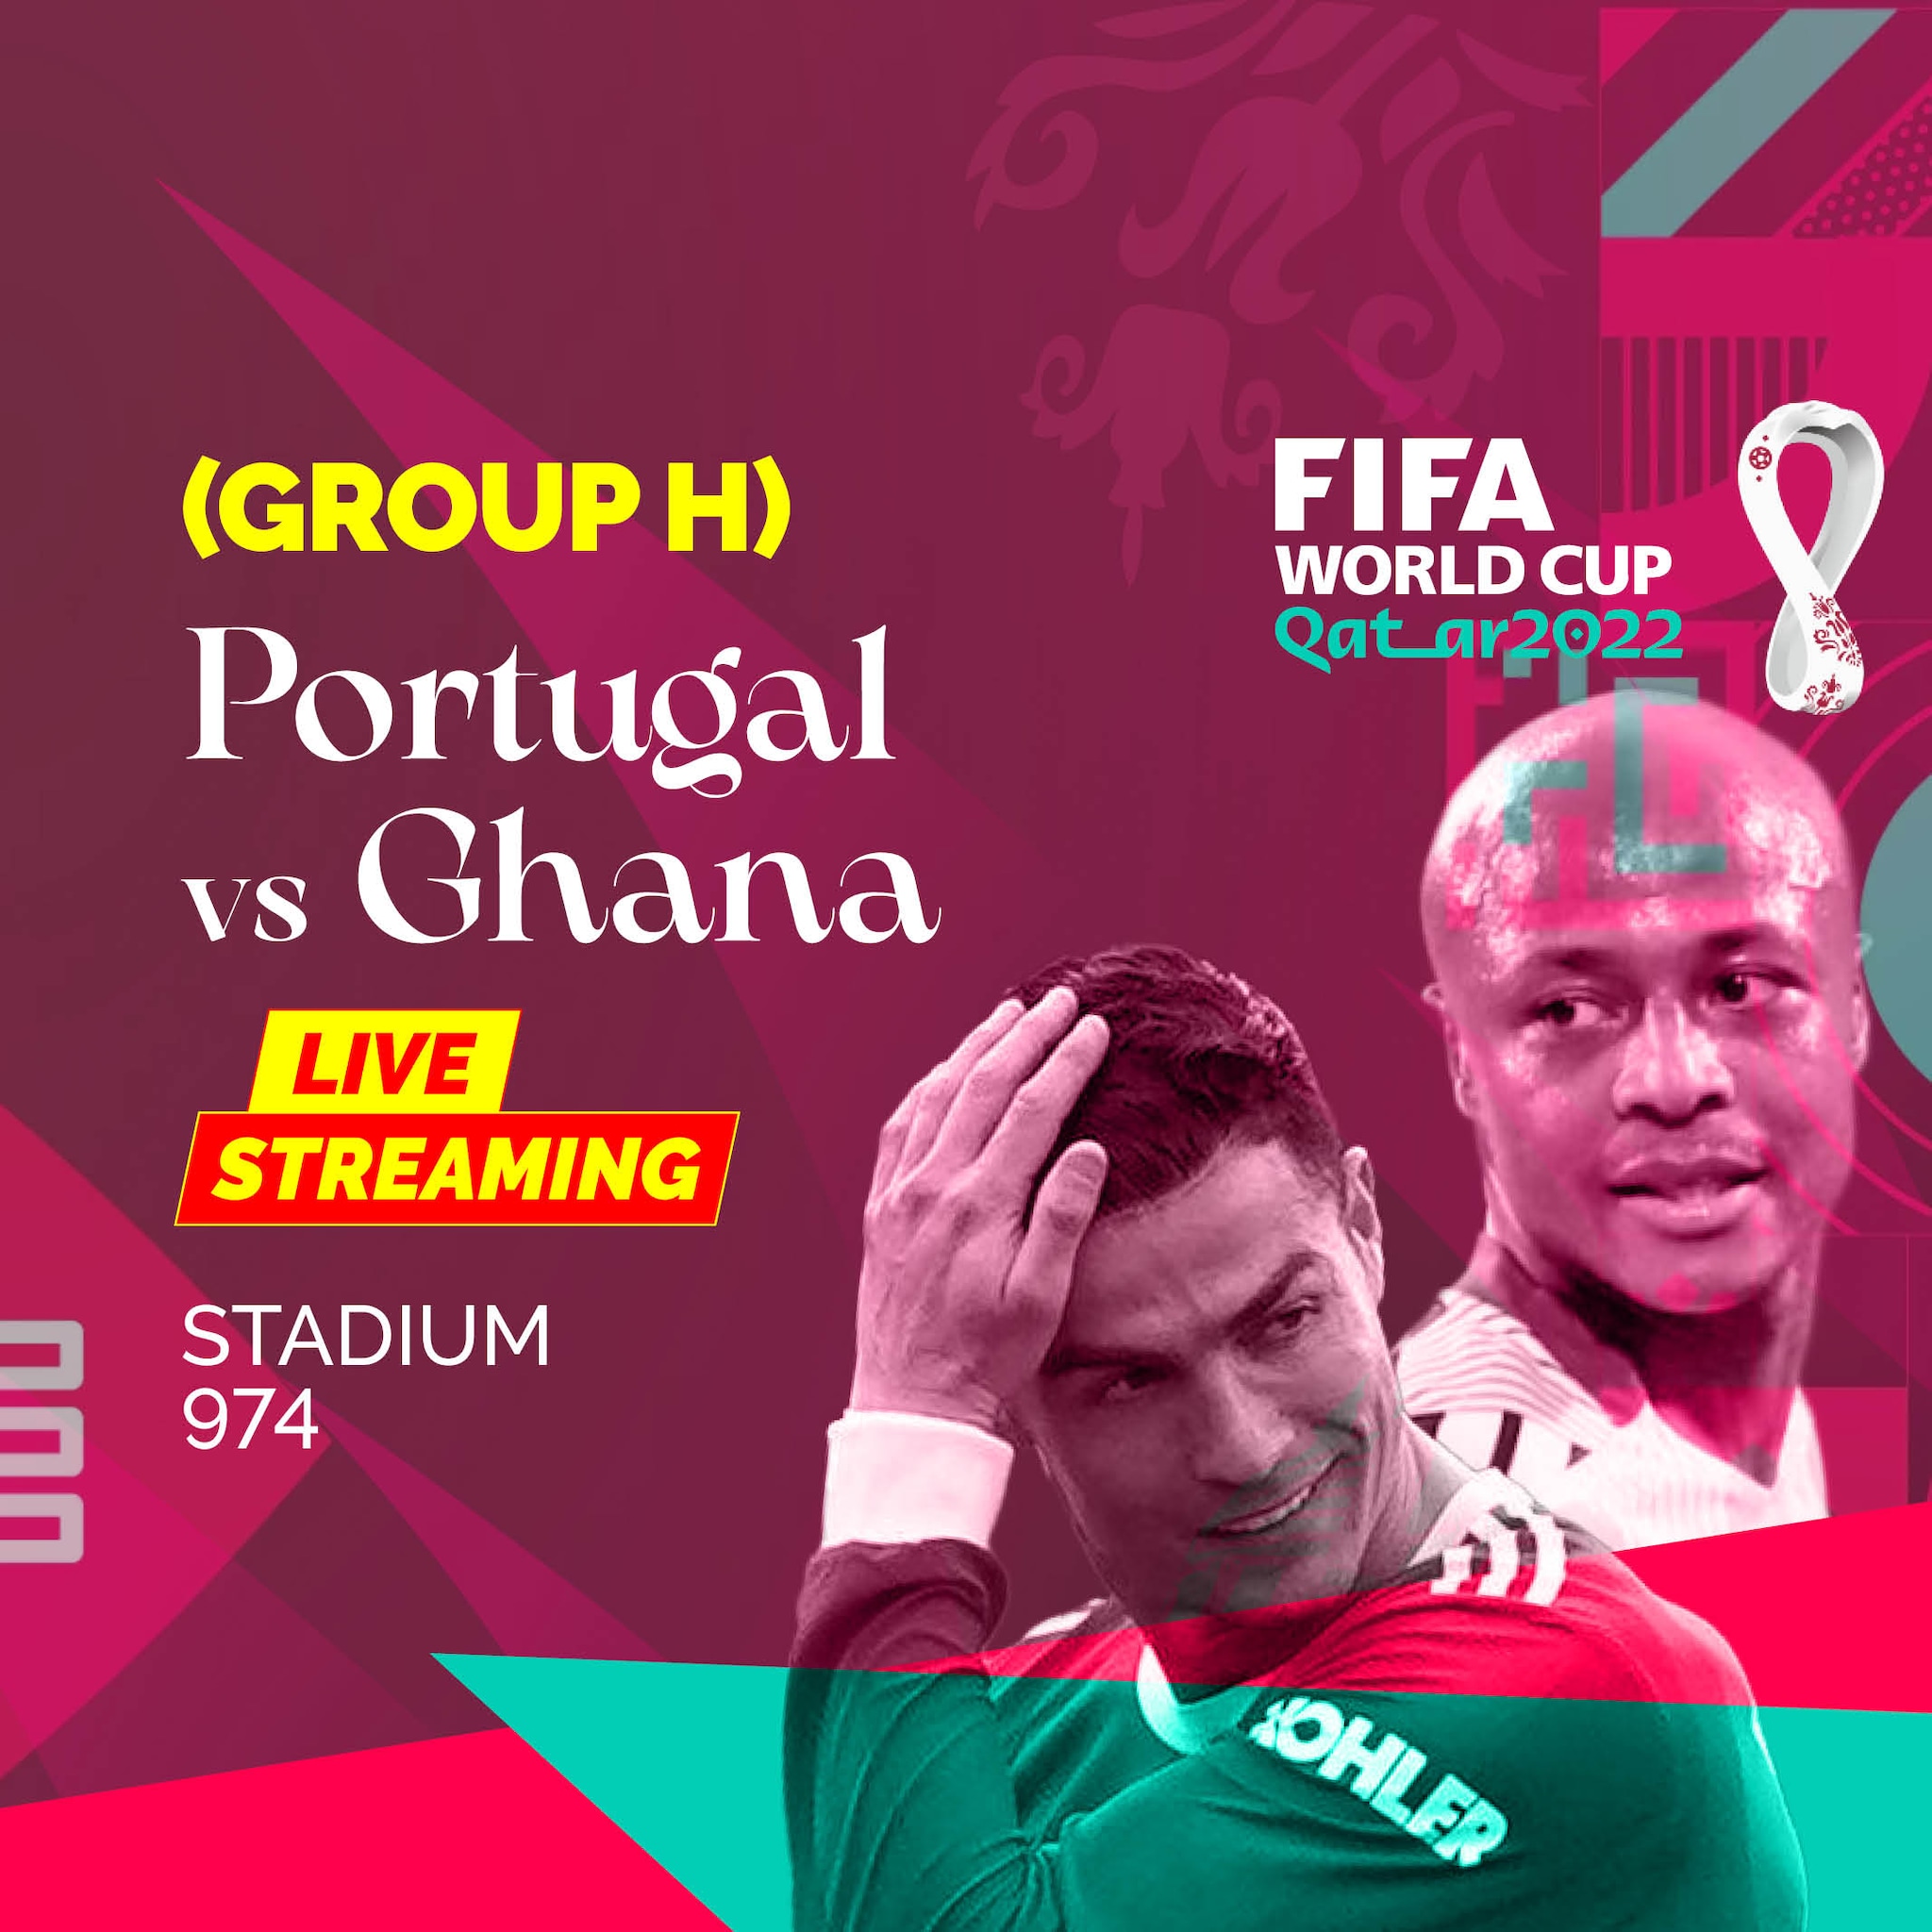 Portugal vs Ghana Live Streaming How to Watch FIFA World Cup 2022 Coverage on TV And Online